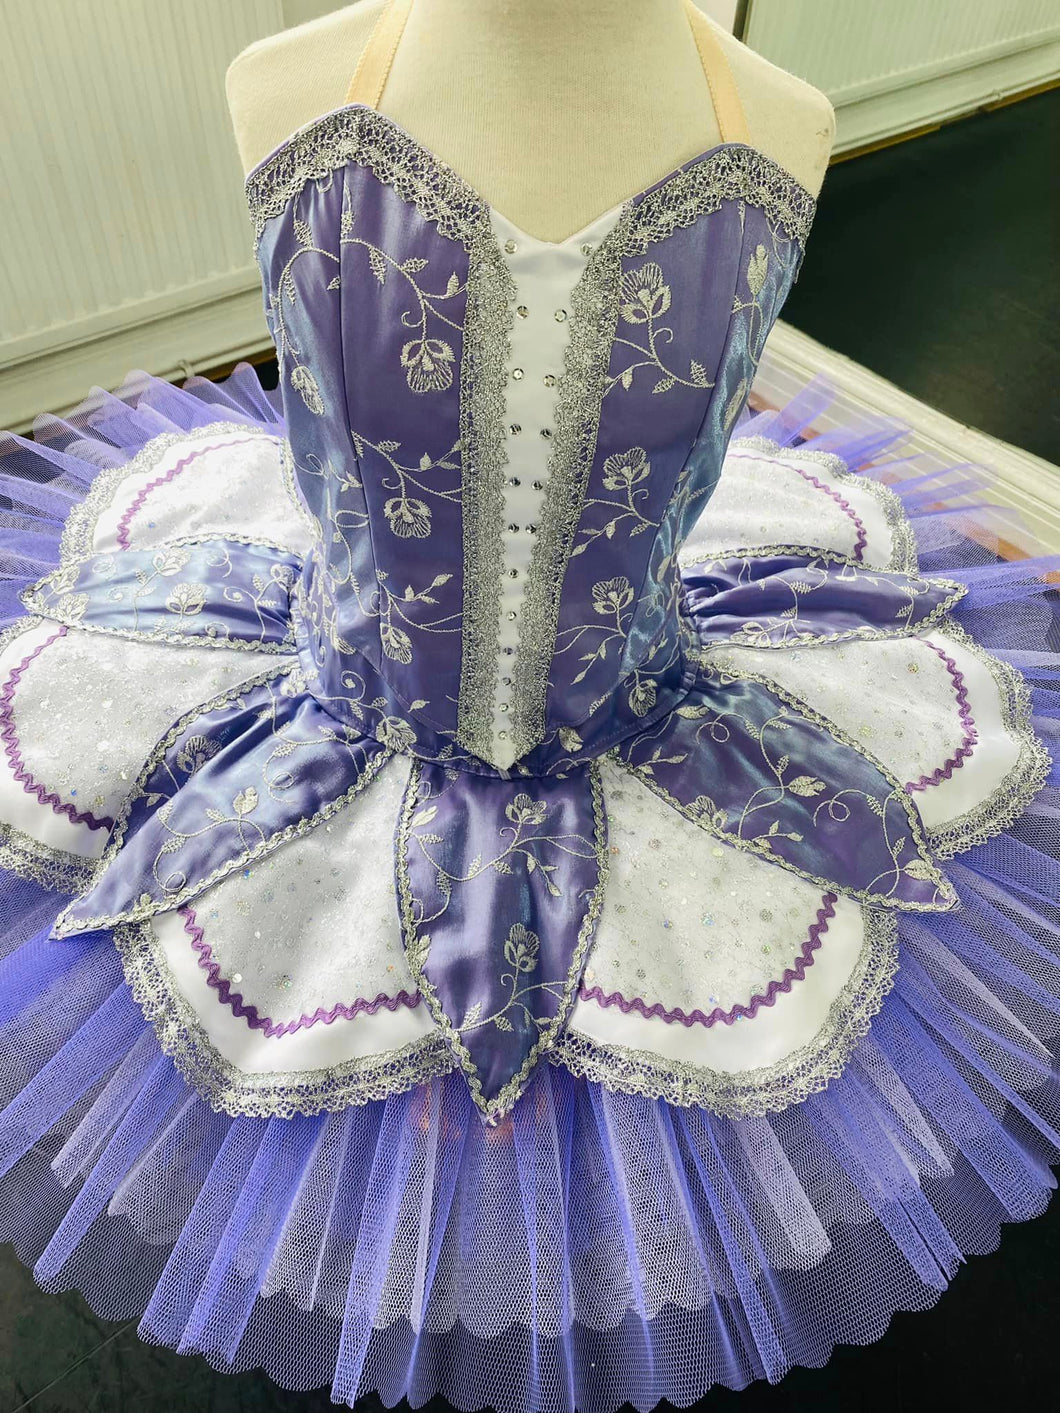 Lilac Satin Tutu with White & Lilac Petals with Silver detail